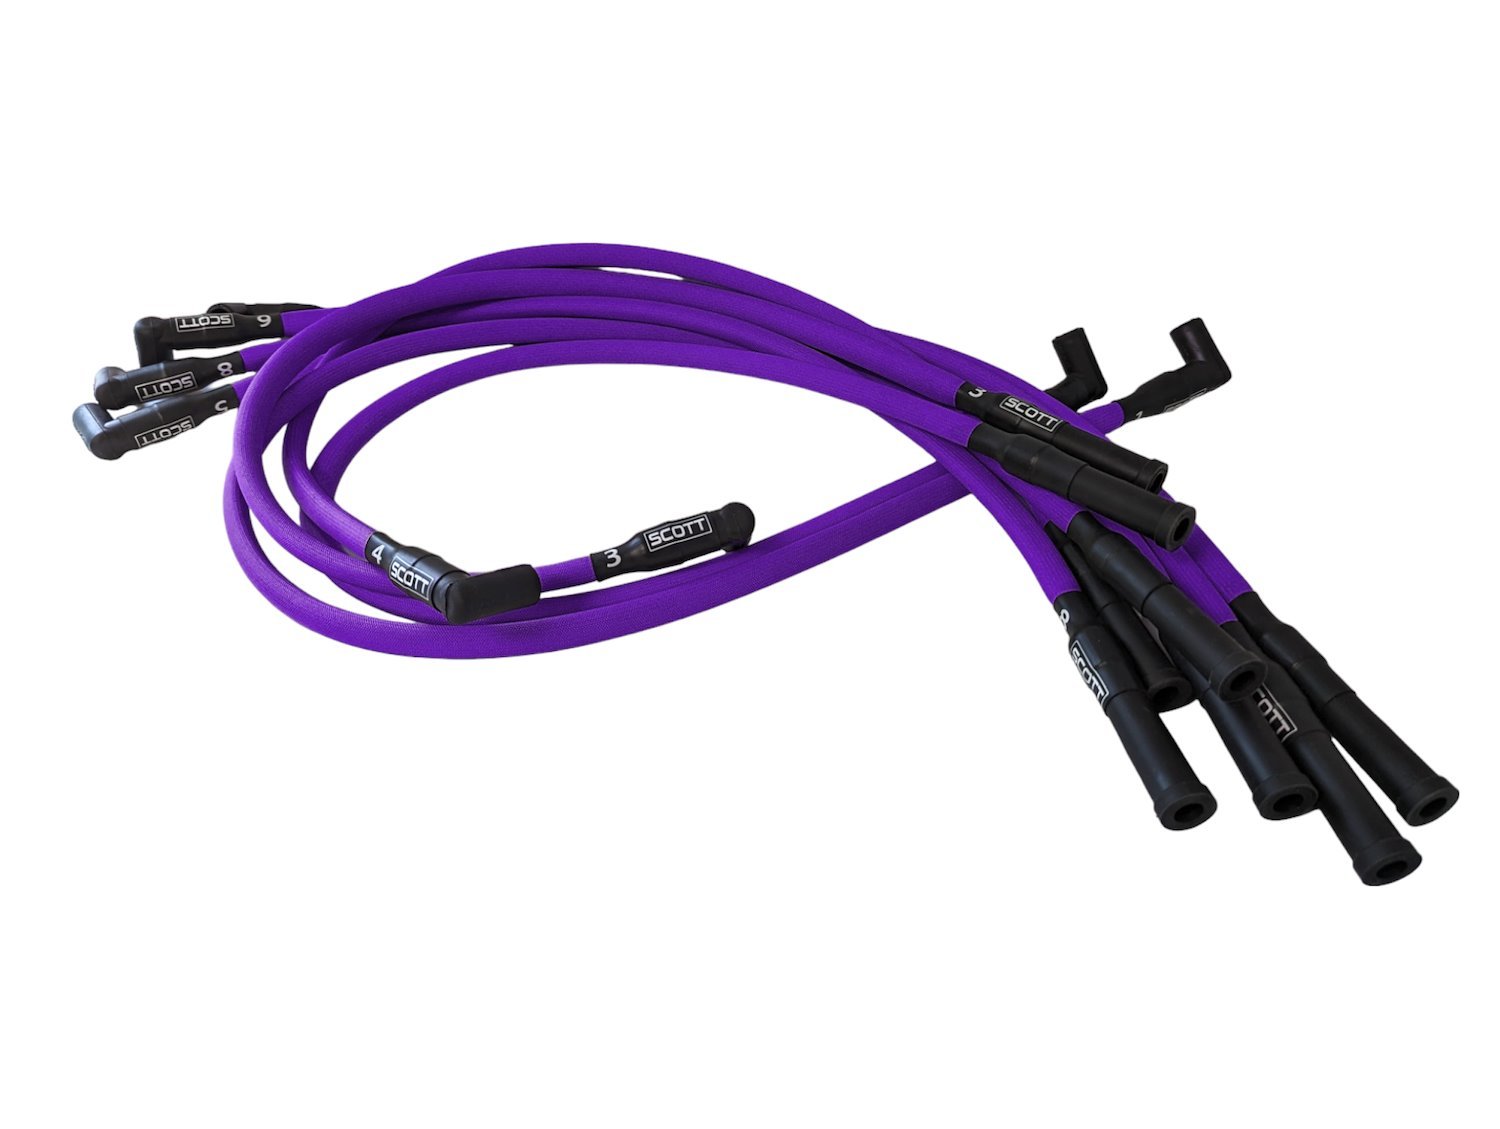 SPW-PS-660-7 High-Performance Fiberglass-Oversleeved Spark Plug Wire Set for Small Block Dodge [Purple]